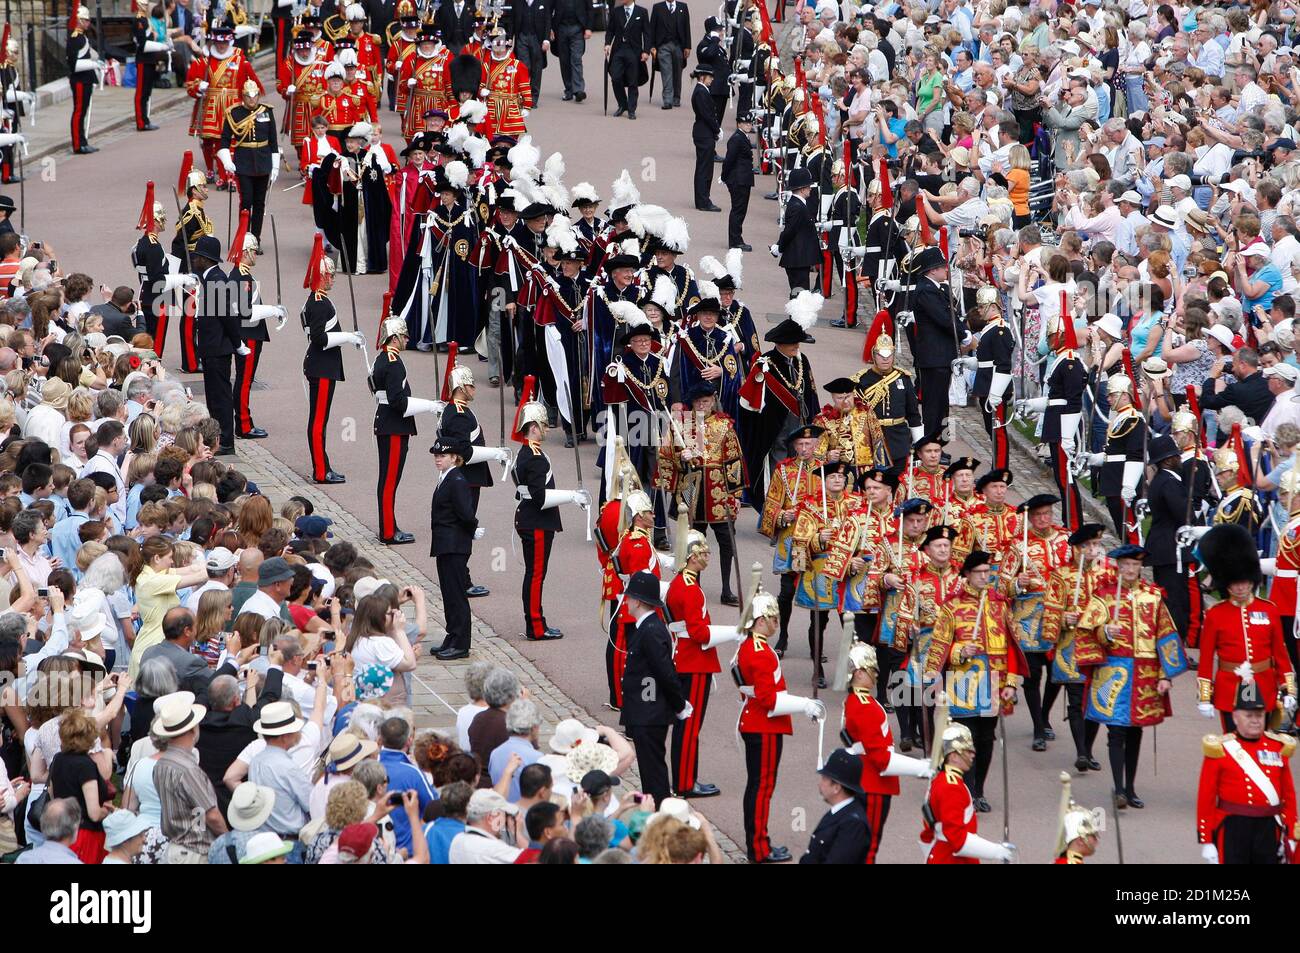 An aerial view shows the procession to attend the Order of the Garter service at St George's Chapel at Windsor Castle in Windsor, southern England, June 15, 2009. Windsor Castle played host to the annual Order of the Garter service, which celebrated the traditions and ideals associated with the Most Noble Order of the Garter.  REUTERS/Kirsty Wigglesworth/Pool  (BRITAIN ROYALS SOCIETY ENTERTAINMENT) Stock Photo